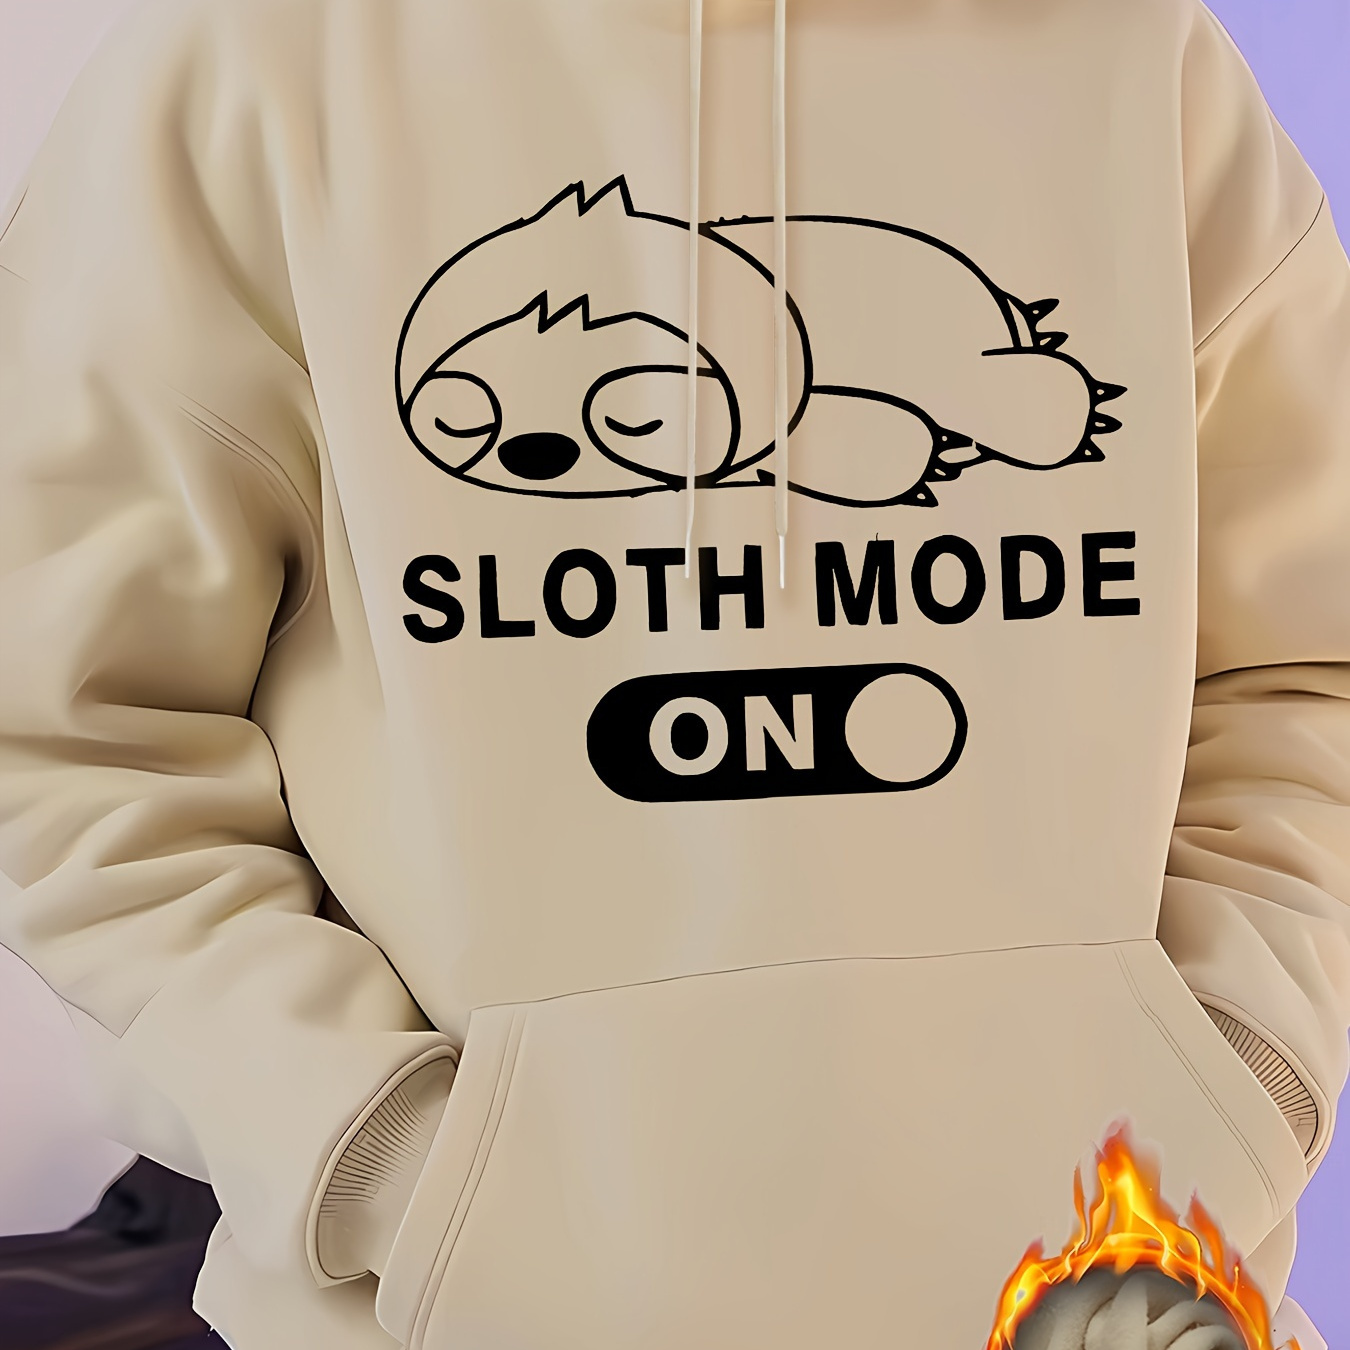 

Lazy Sloth Mode On Print Men's Pullover Round Neck Long Sleeve Hooded Sweatshirt Pattern Loose Casual Top For Autumn Winter Men's Clothing As Gifts